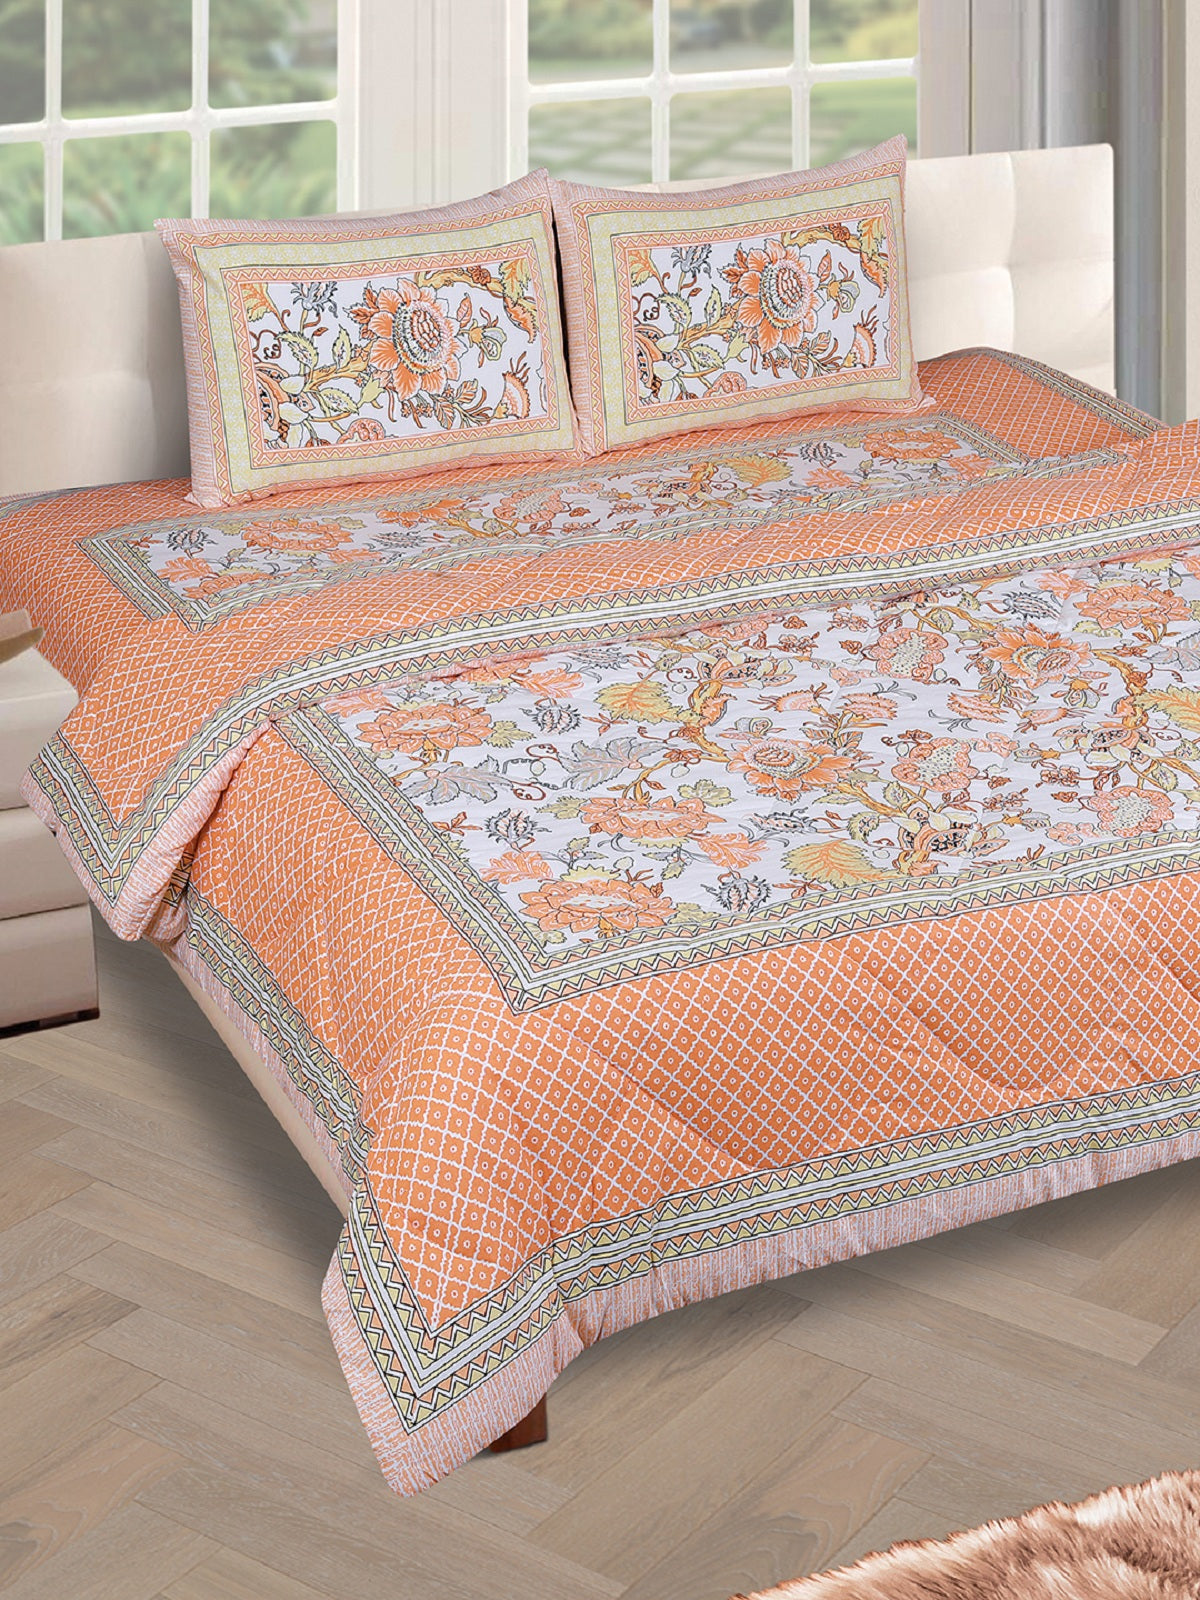 Jaipuri Bedding Set Quilt With King Size Bedsheet and 2 Pillow Covers, Orange & White